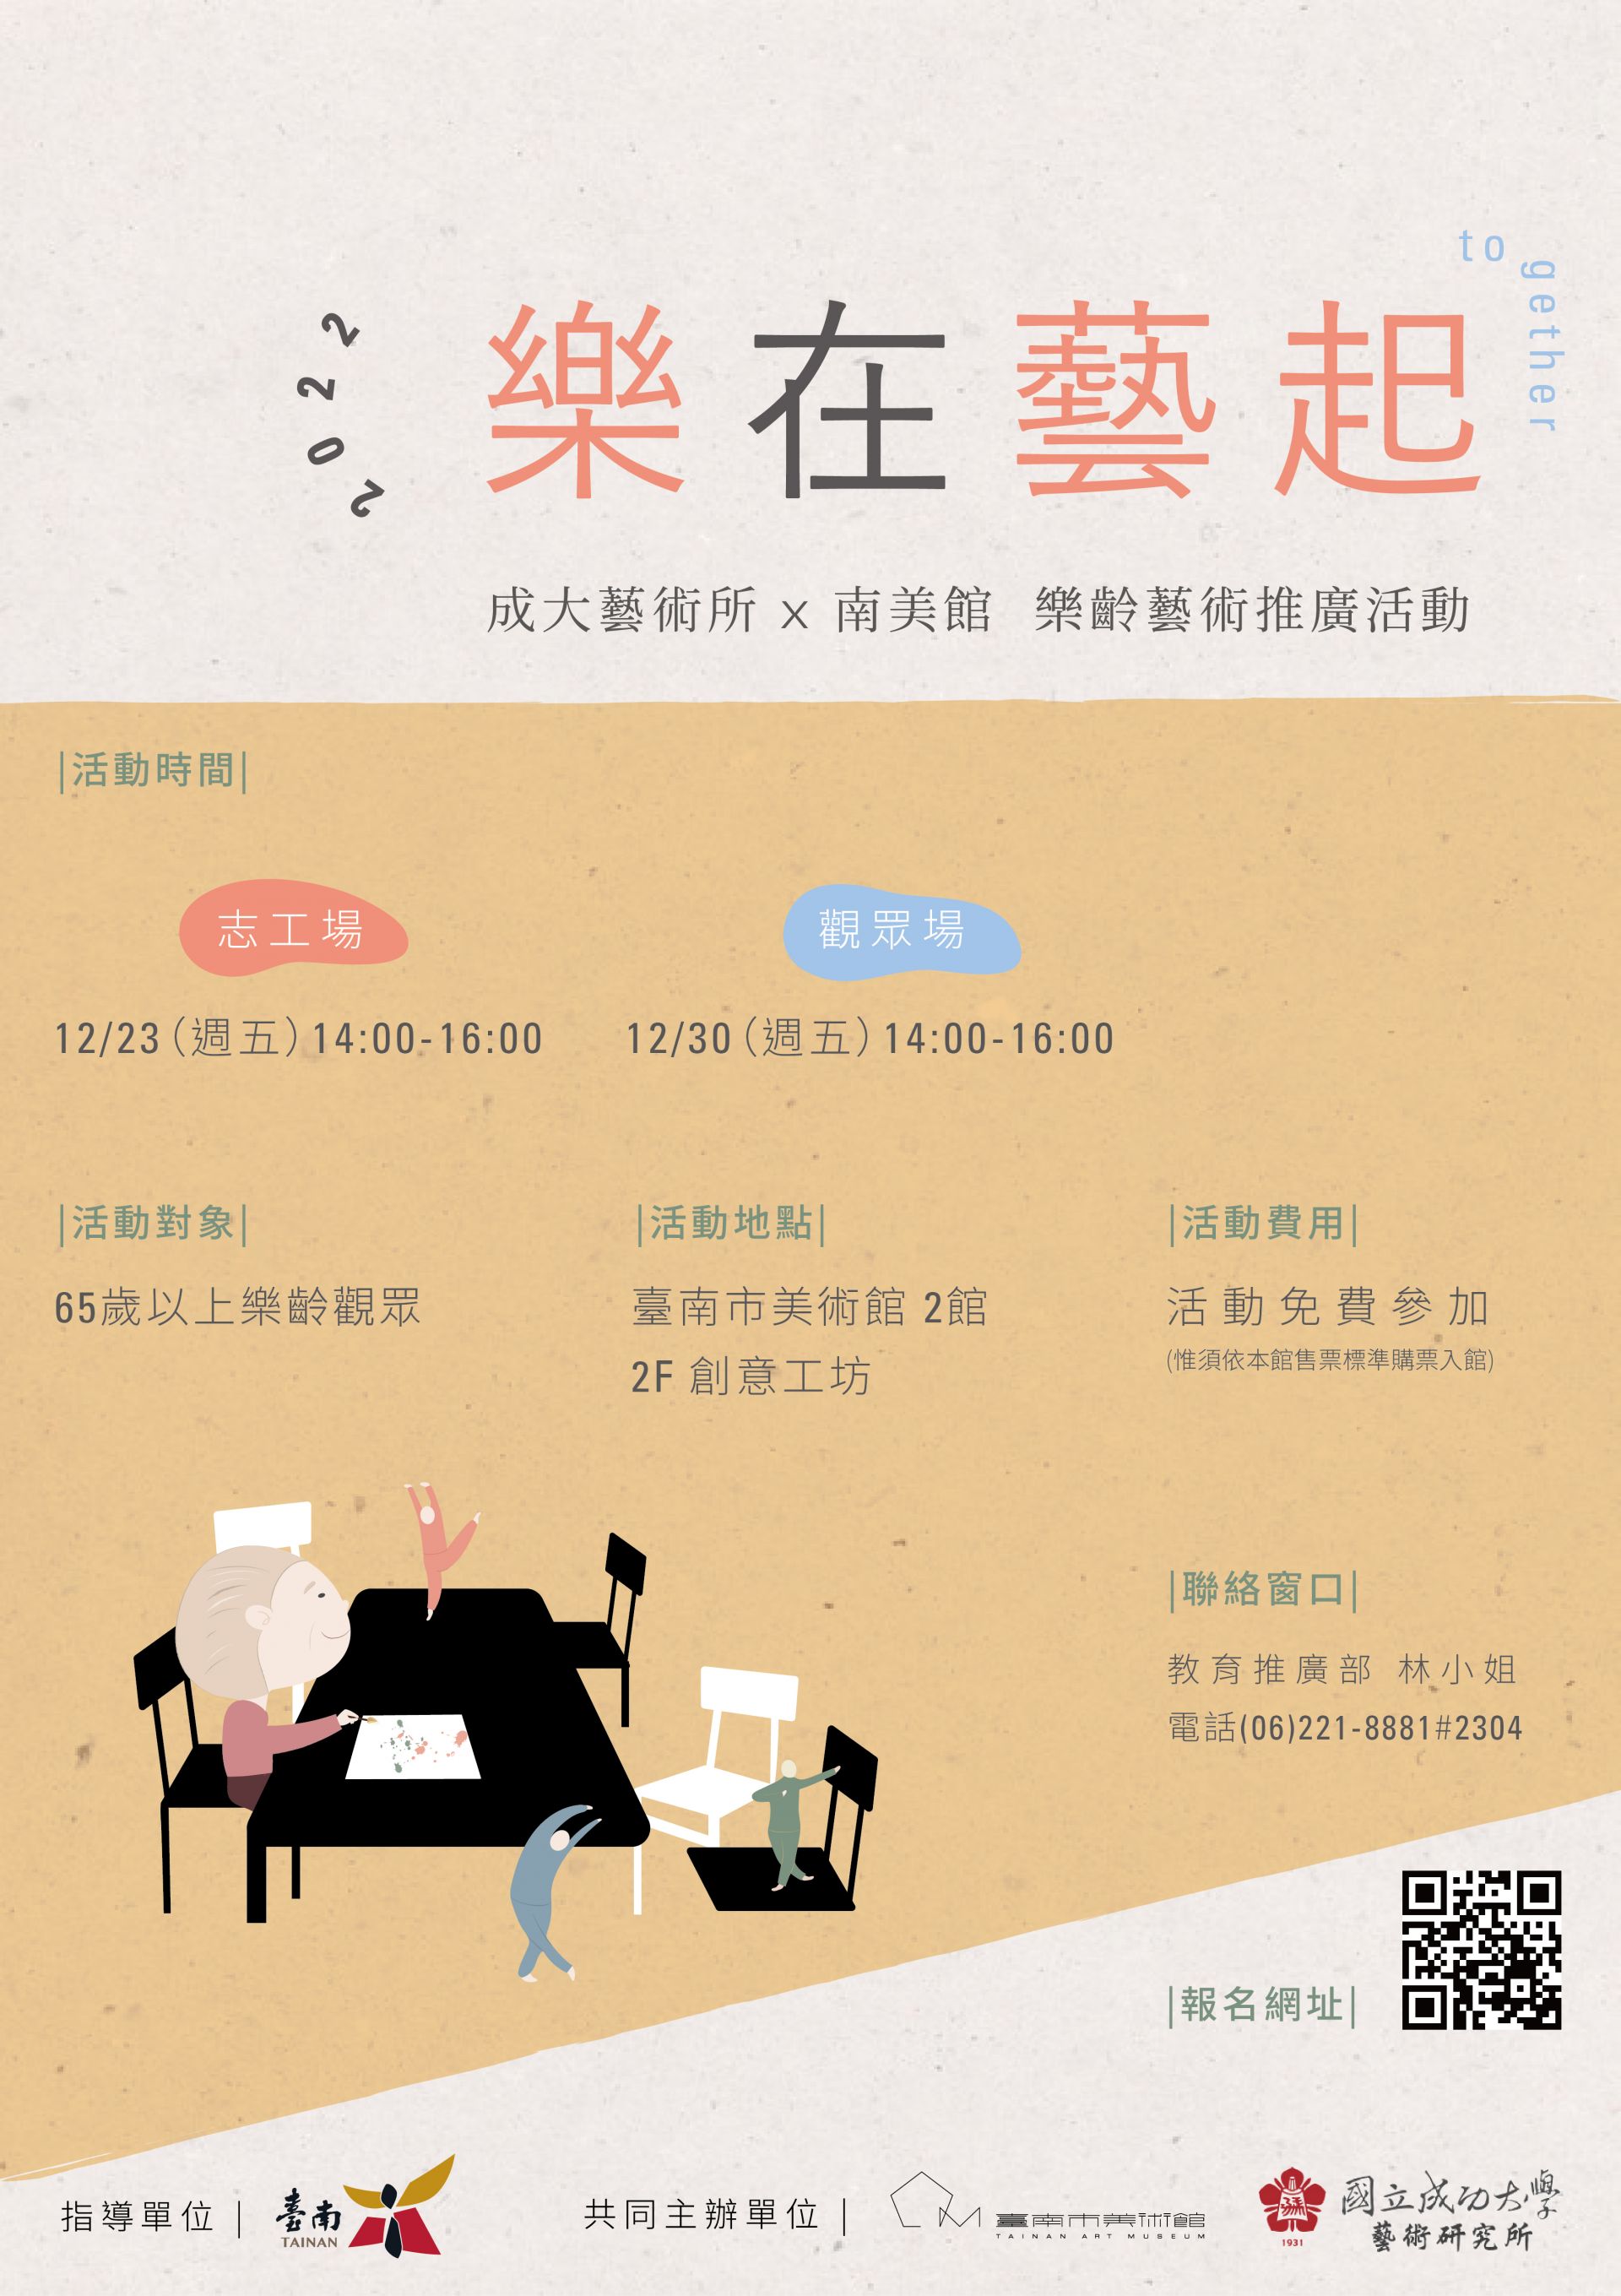 NCKU Institute of Art Study Cooperates with Tainan Art Museum in Promoting Aging Art Healing-Education